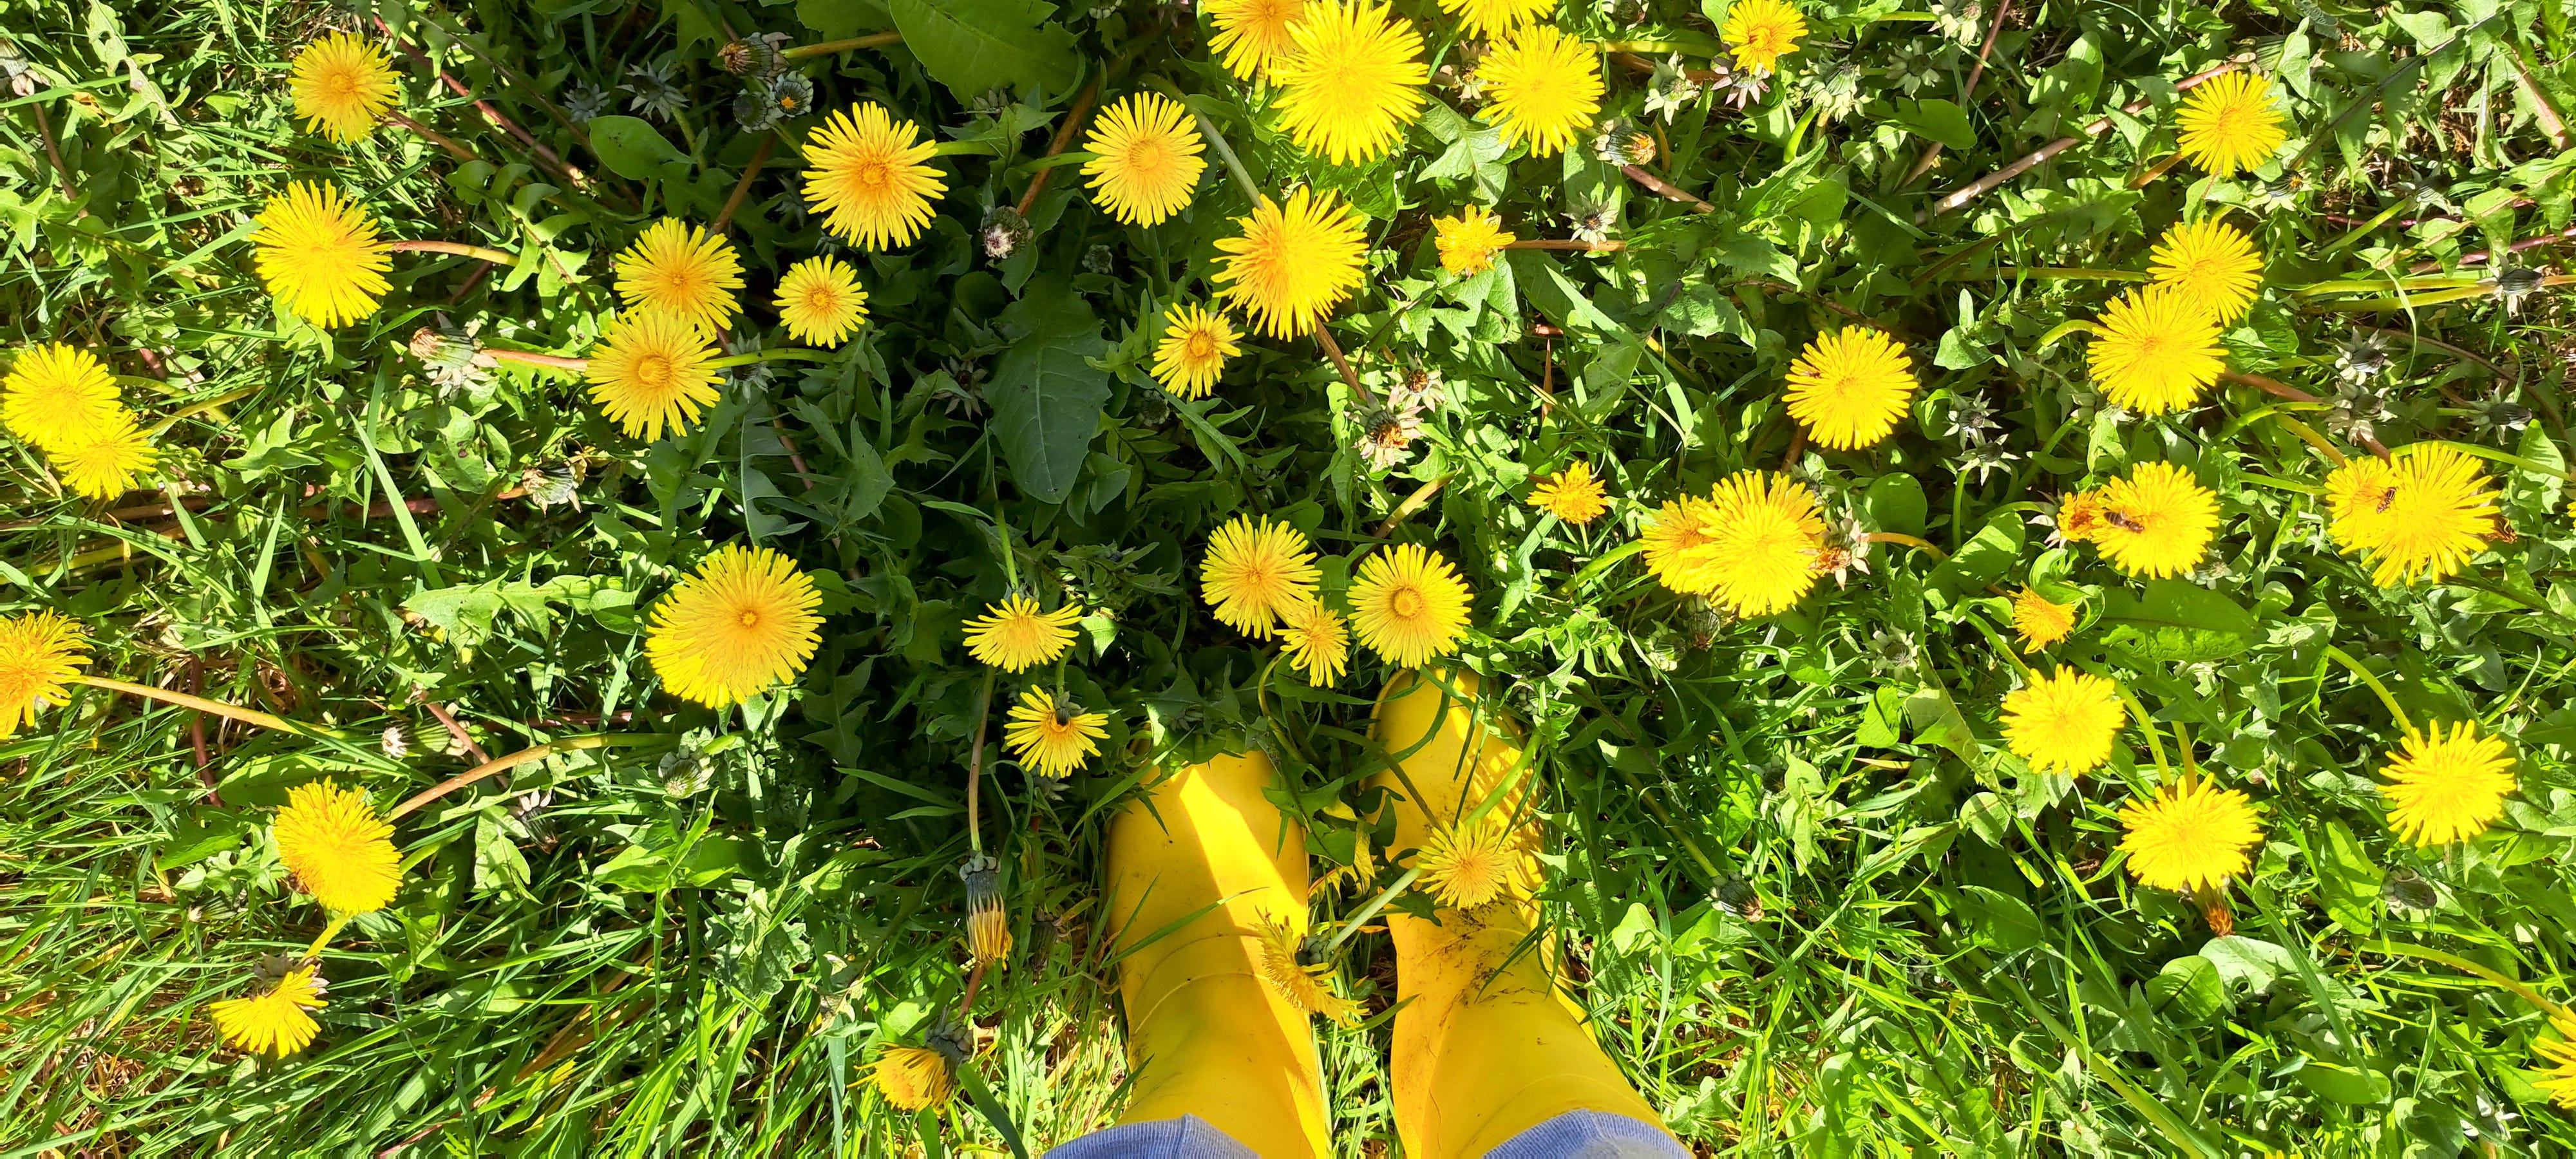 Standing in a patch of bright yellow dandelions wearing yellow wellies